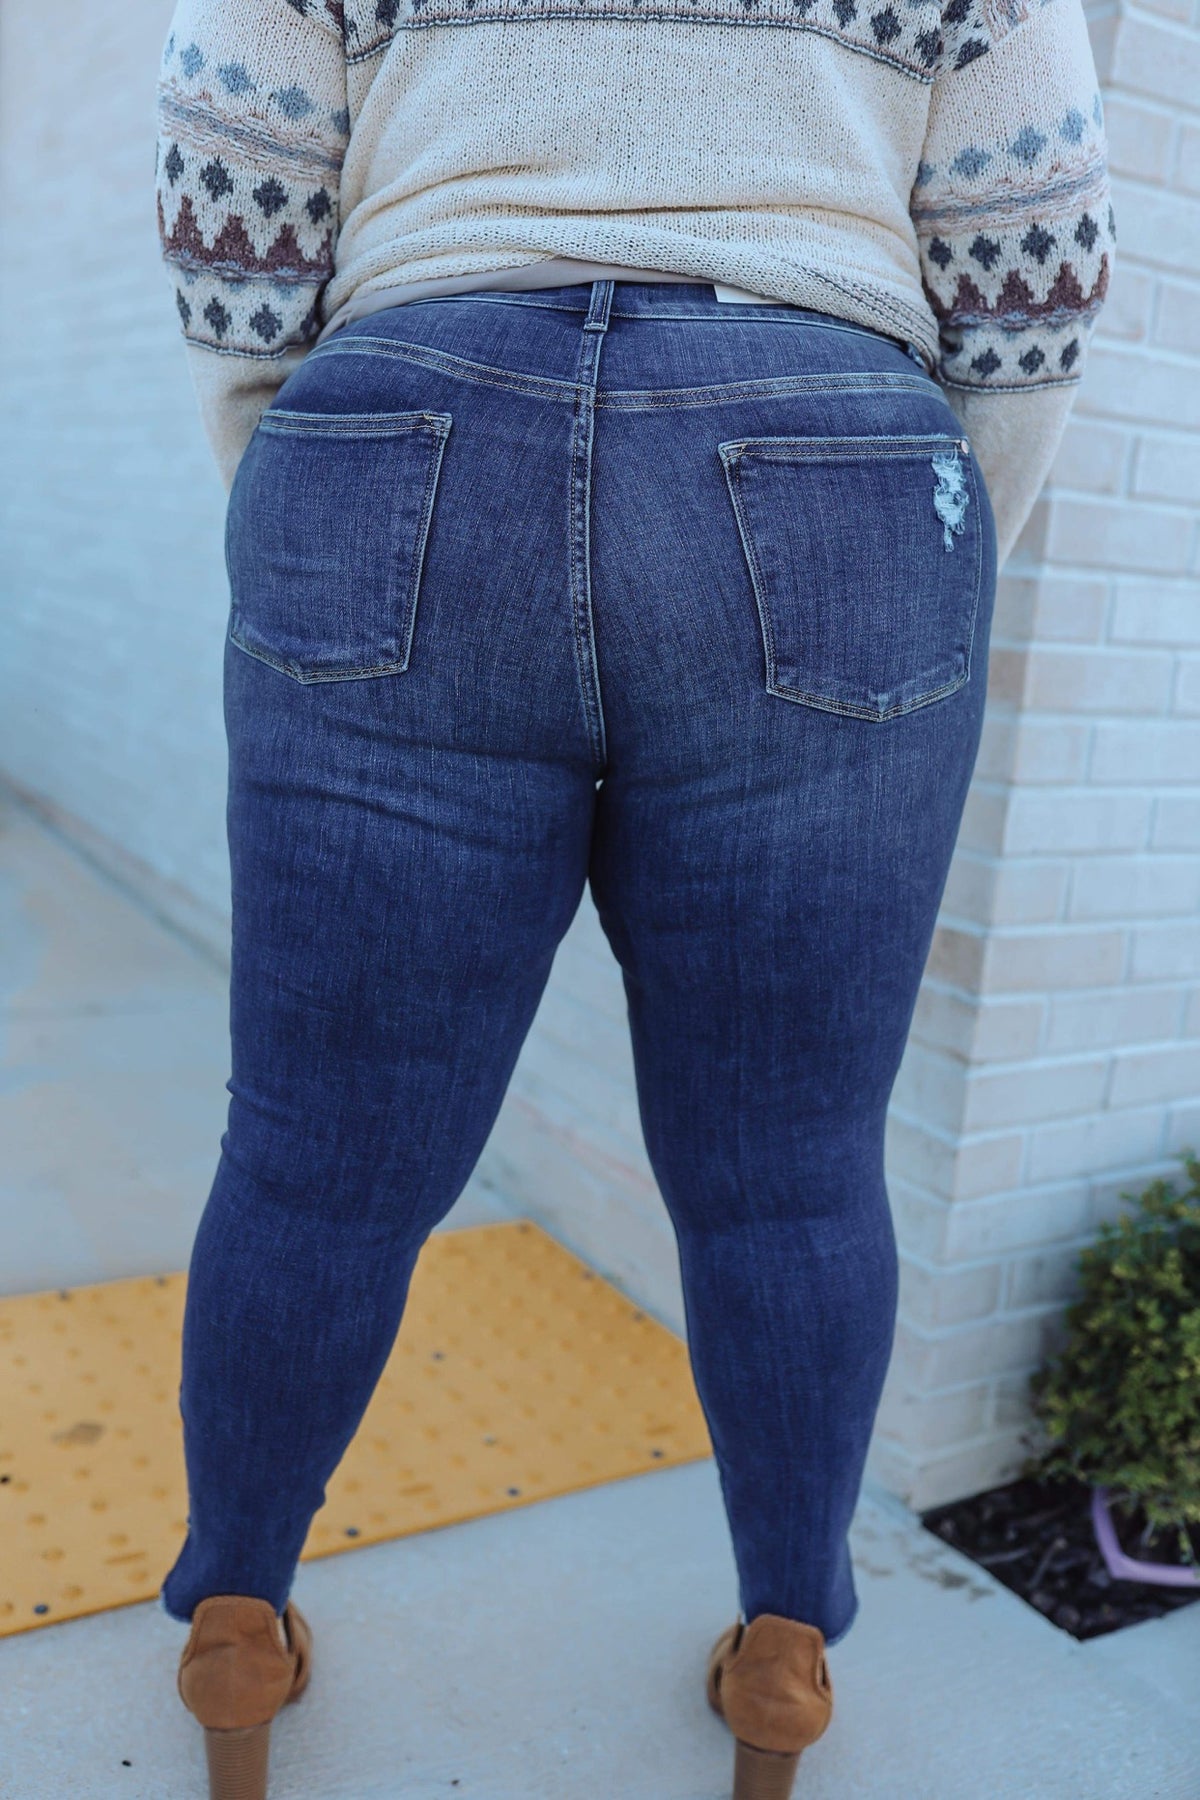 Annagrace Plus Size High-Rise Skinny Jeans